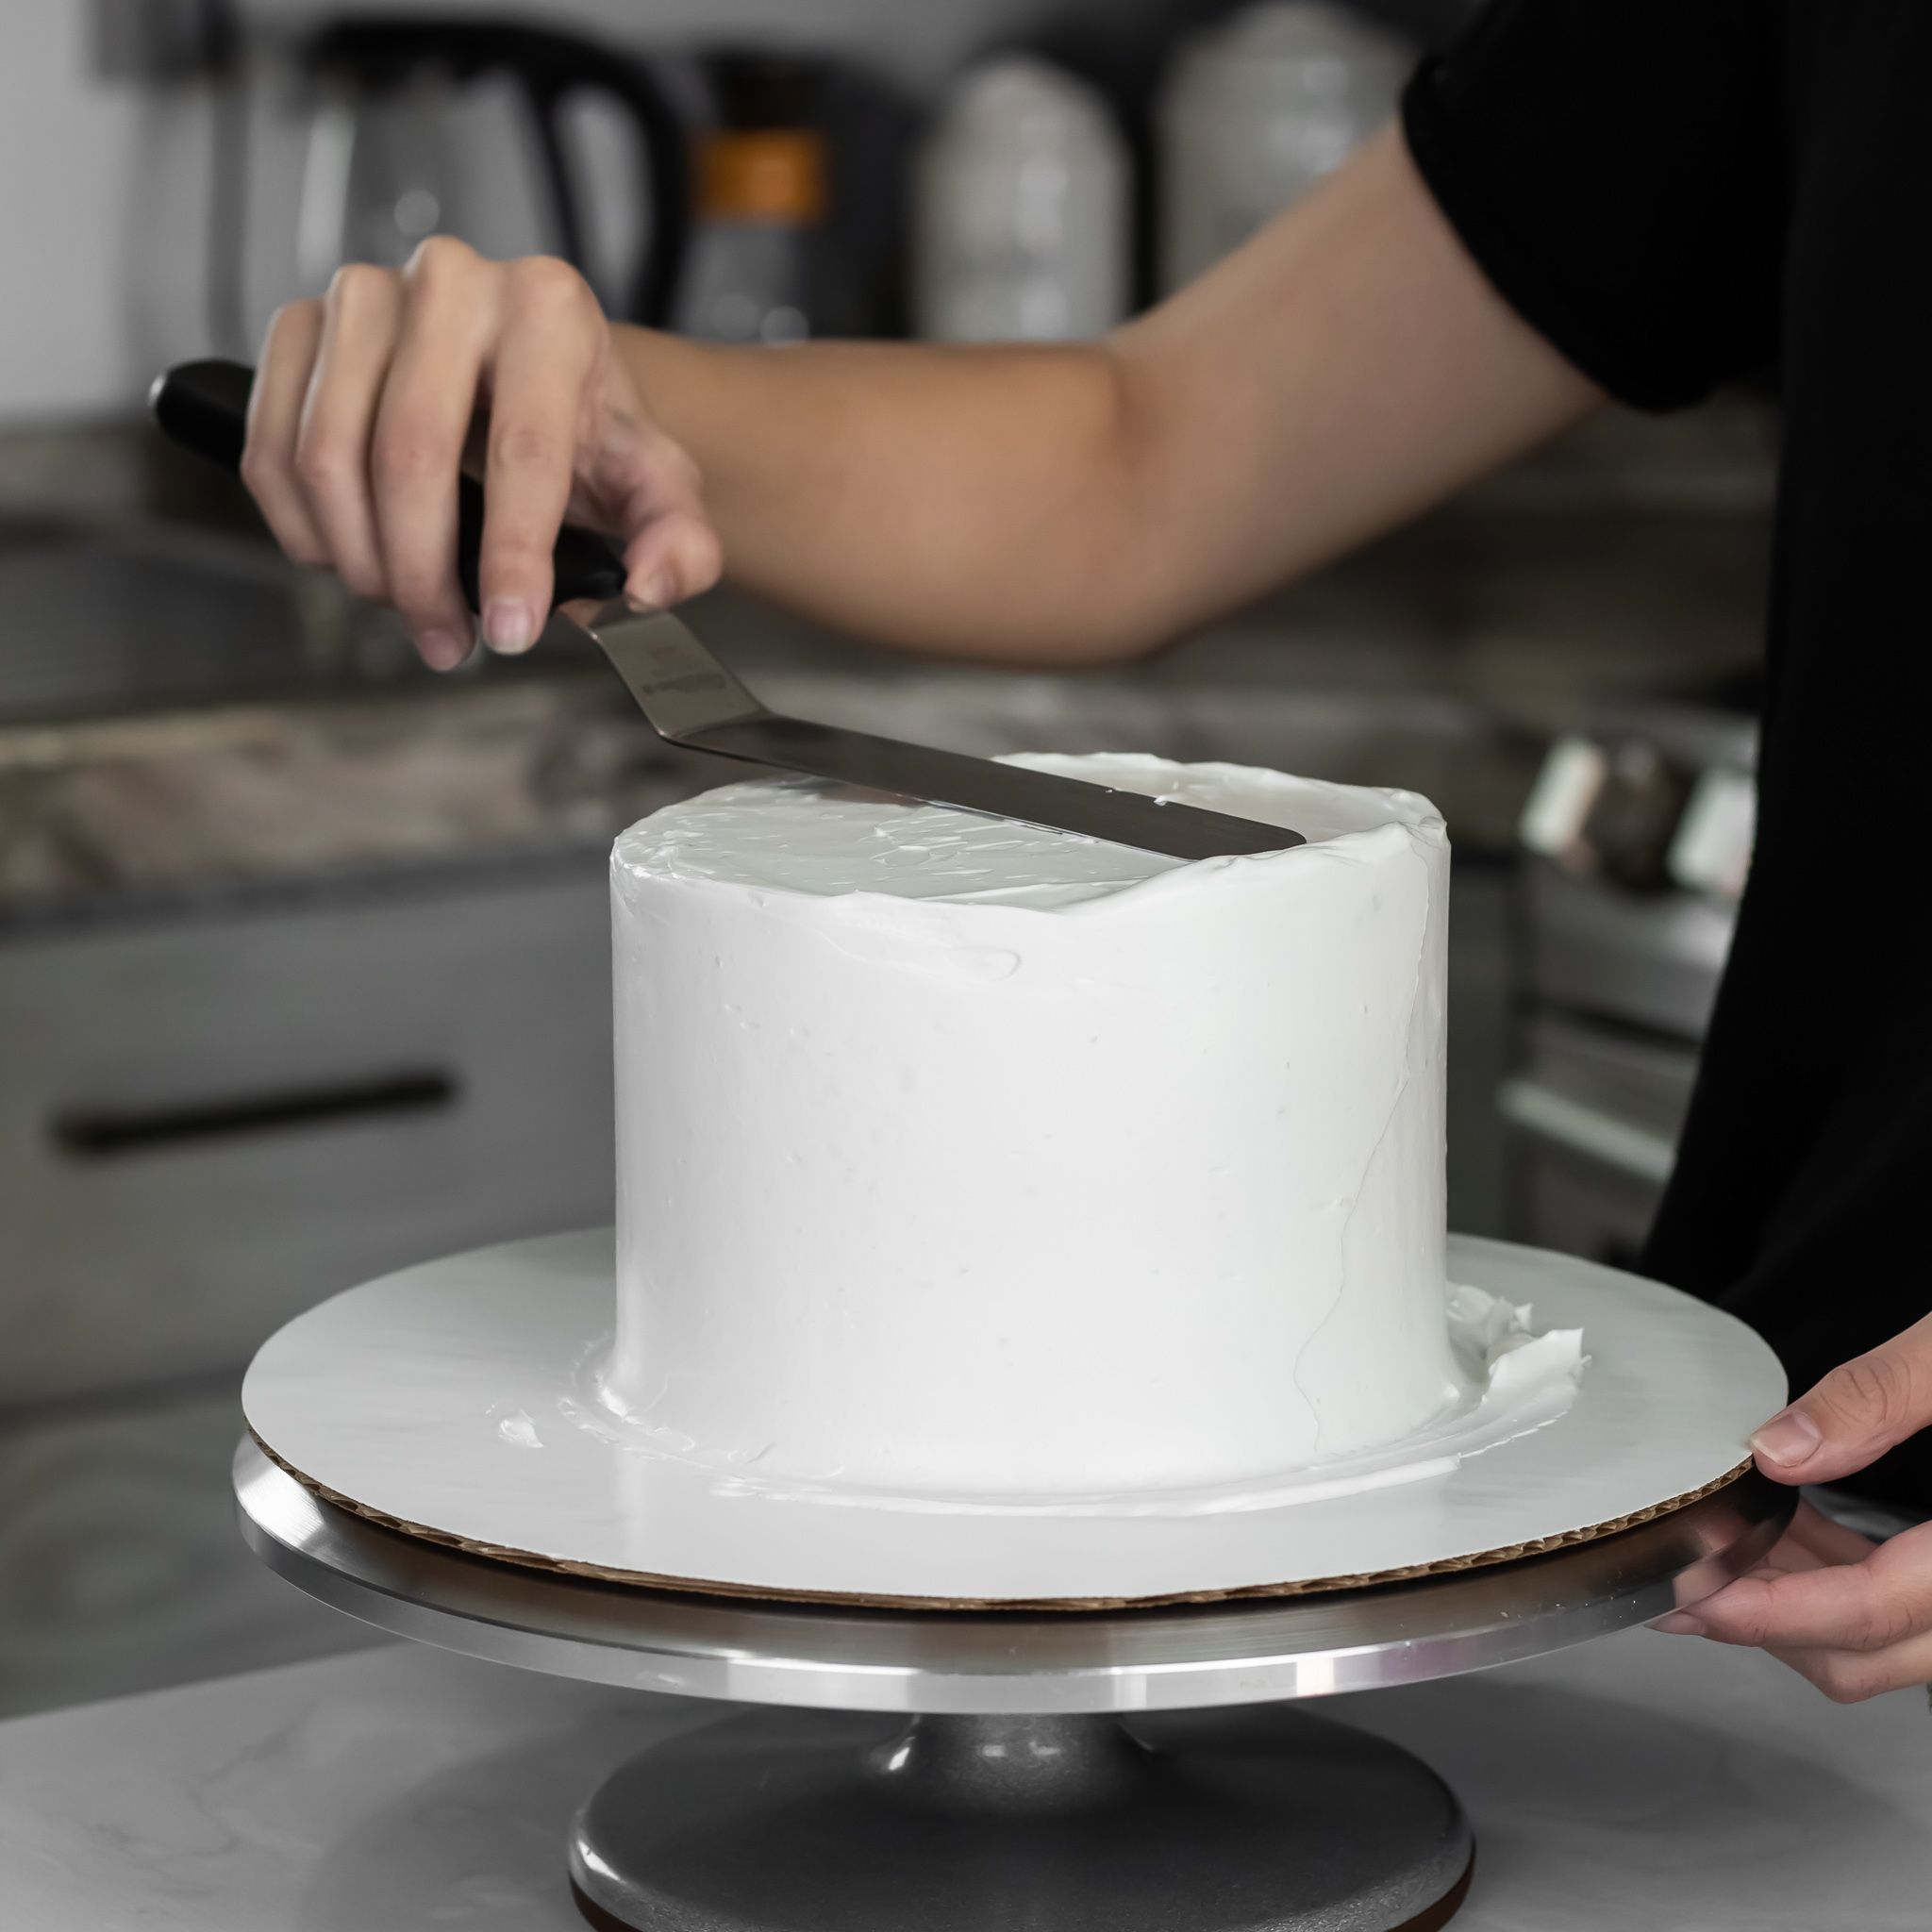 smoothing whipped cream cake with offset spatula